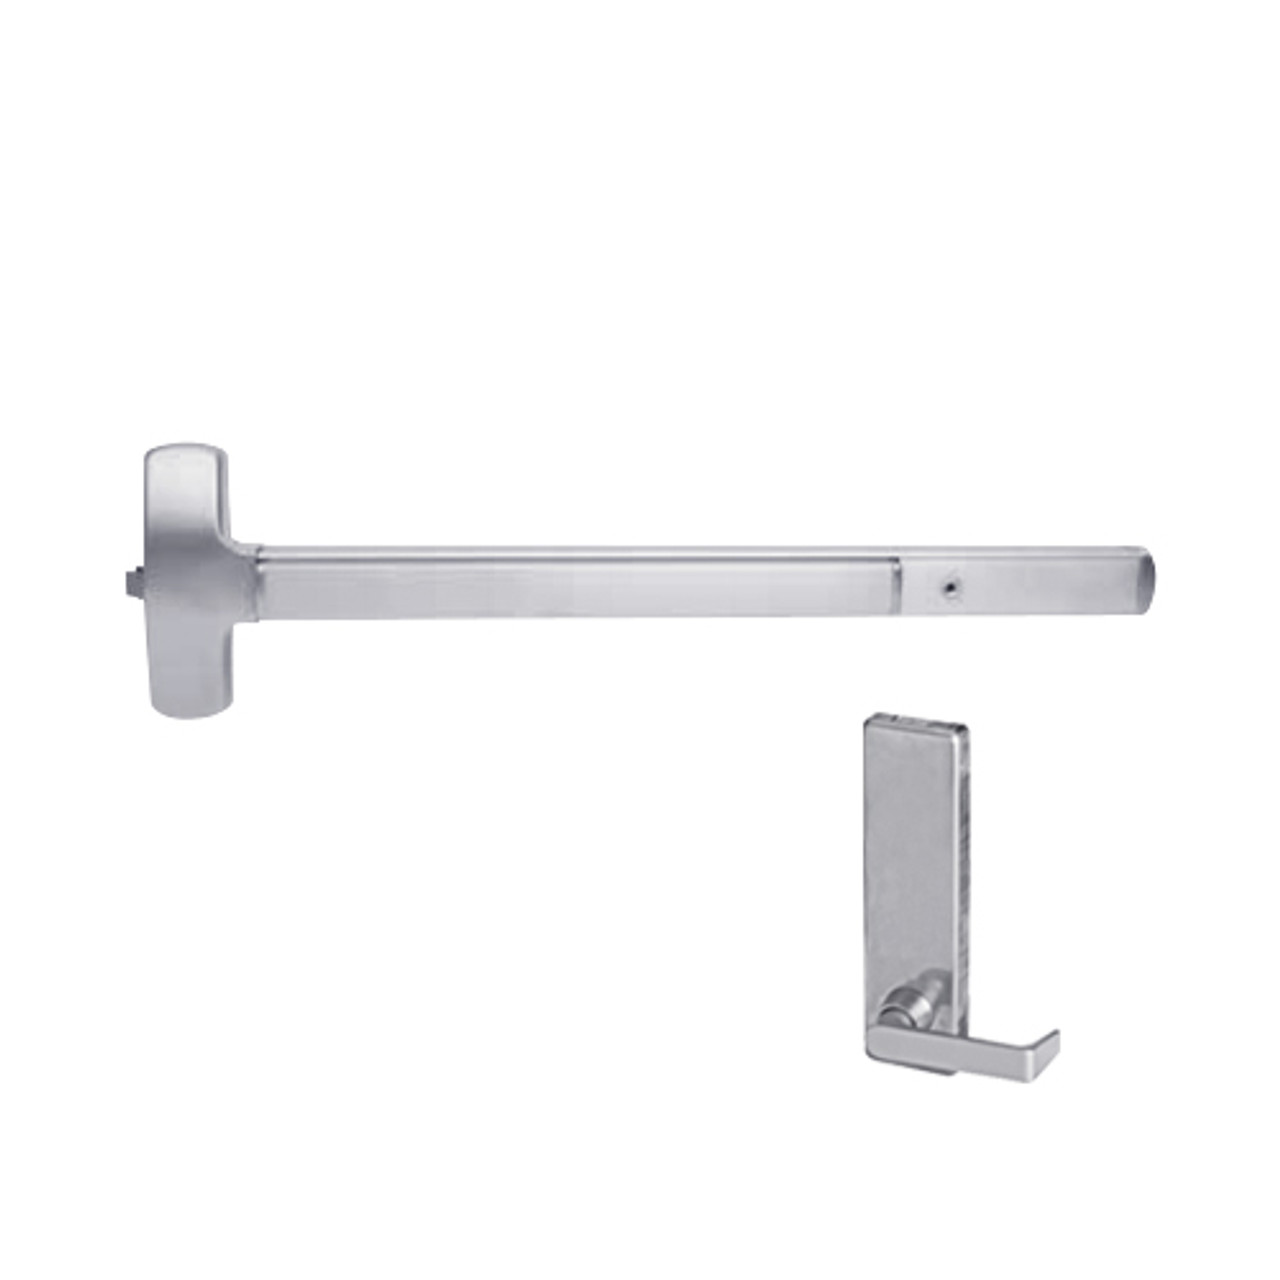 25-R-L-DT-DANE-US32-3-LHR Falcon Exit Device in Polished Stainless Steel